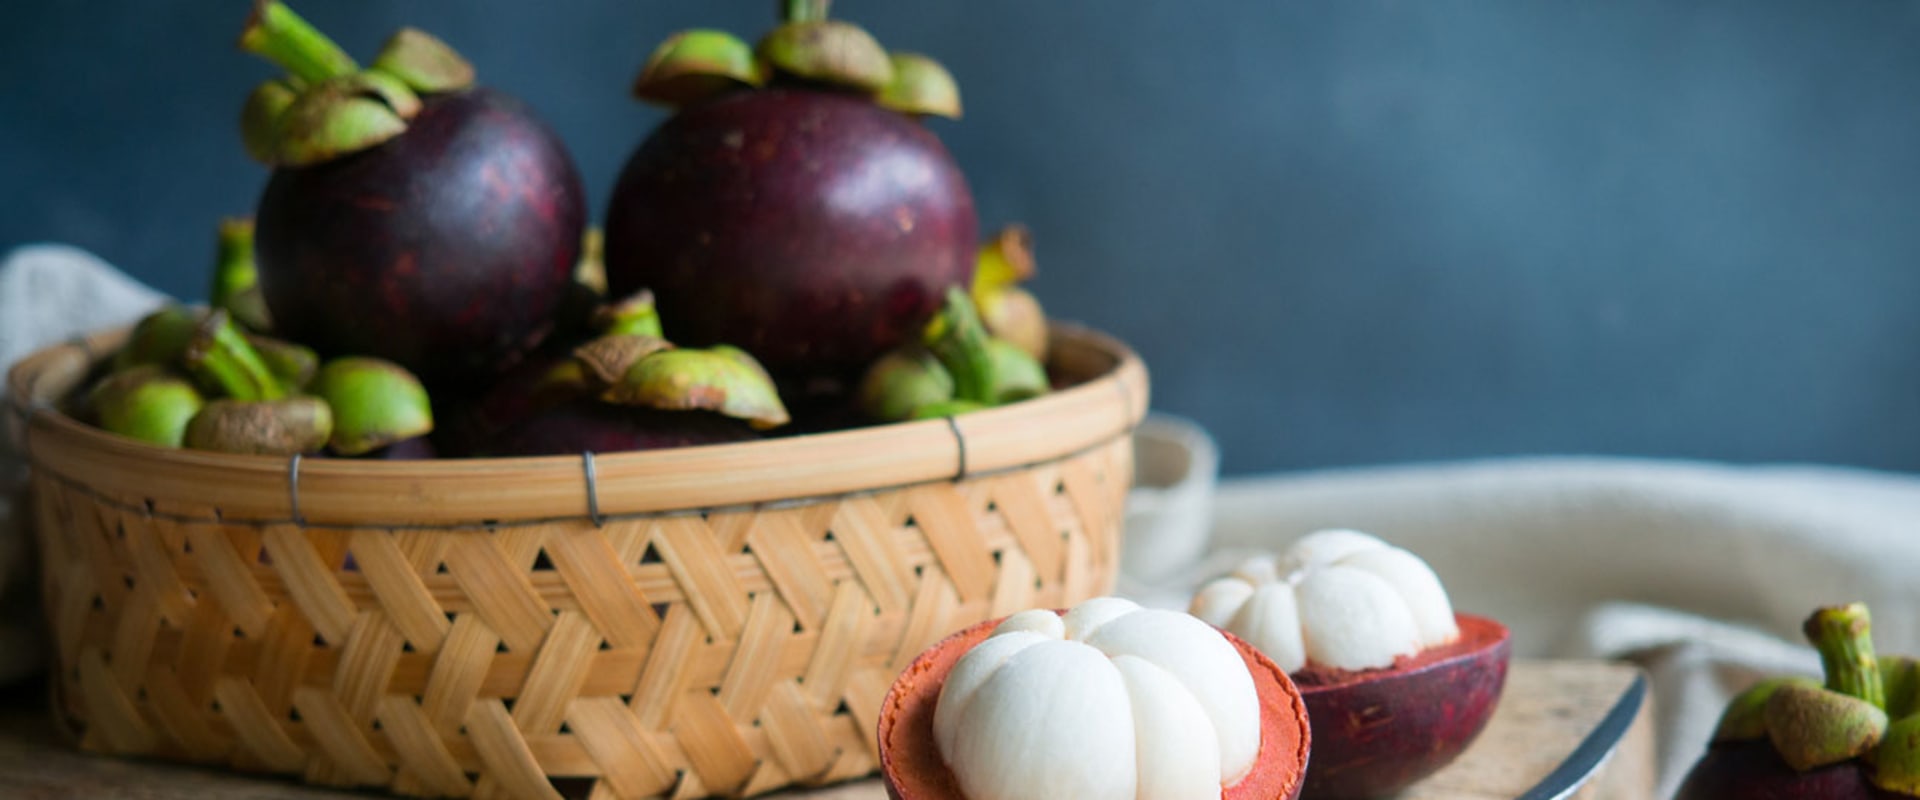 How can mangosteen help improve overall health?